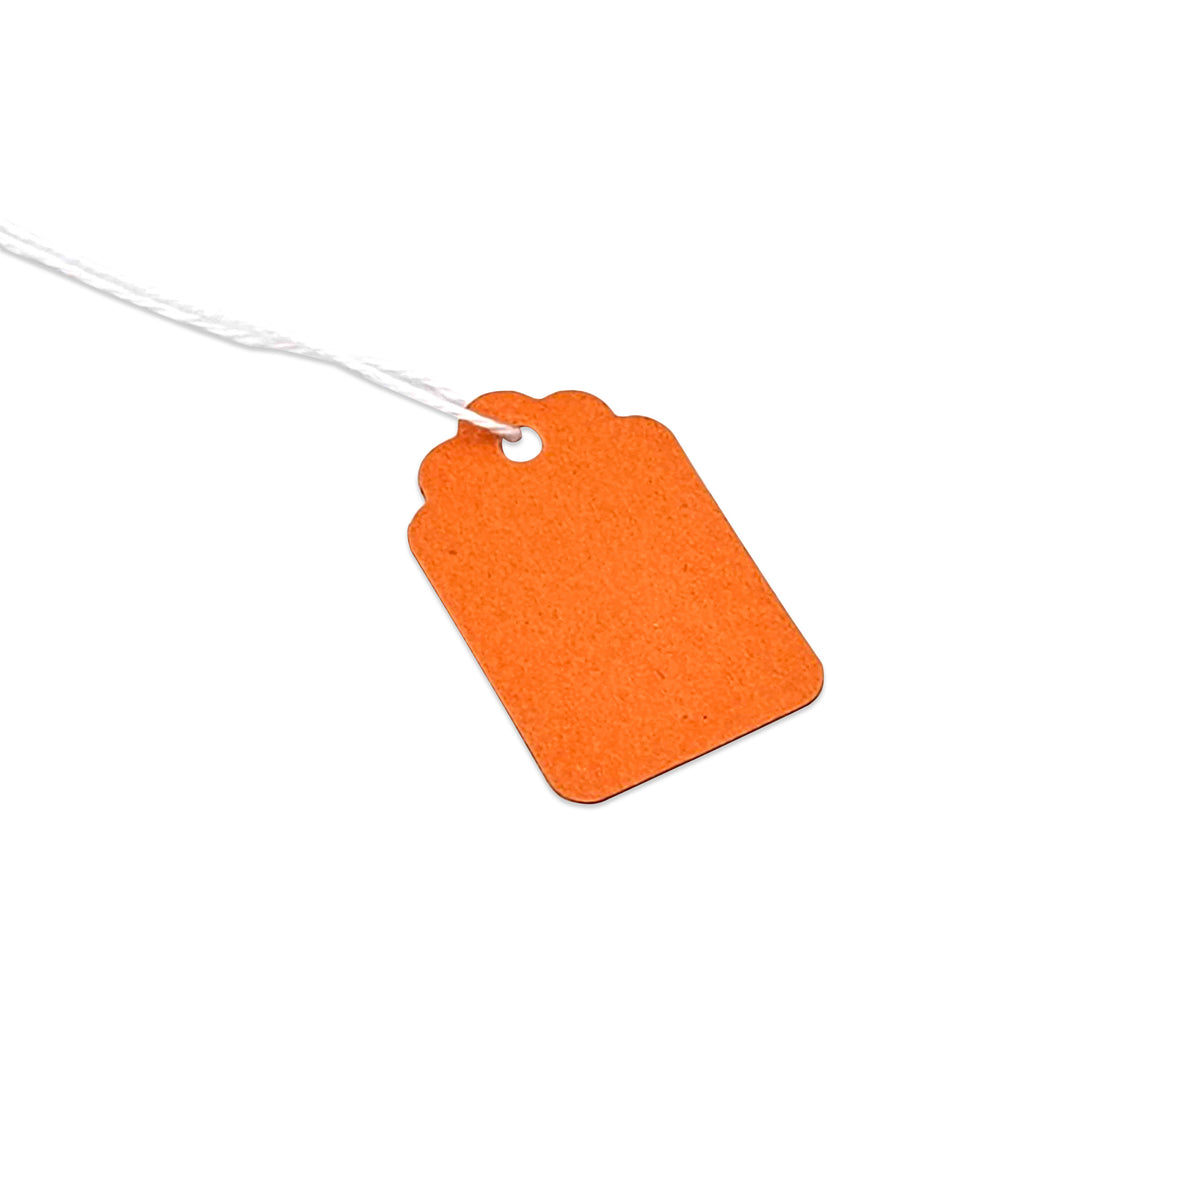 100-Pack of 22 x 35mm Orange Paper Knotted String Price Tags – JPI